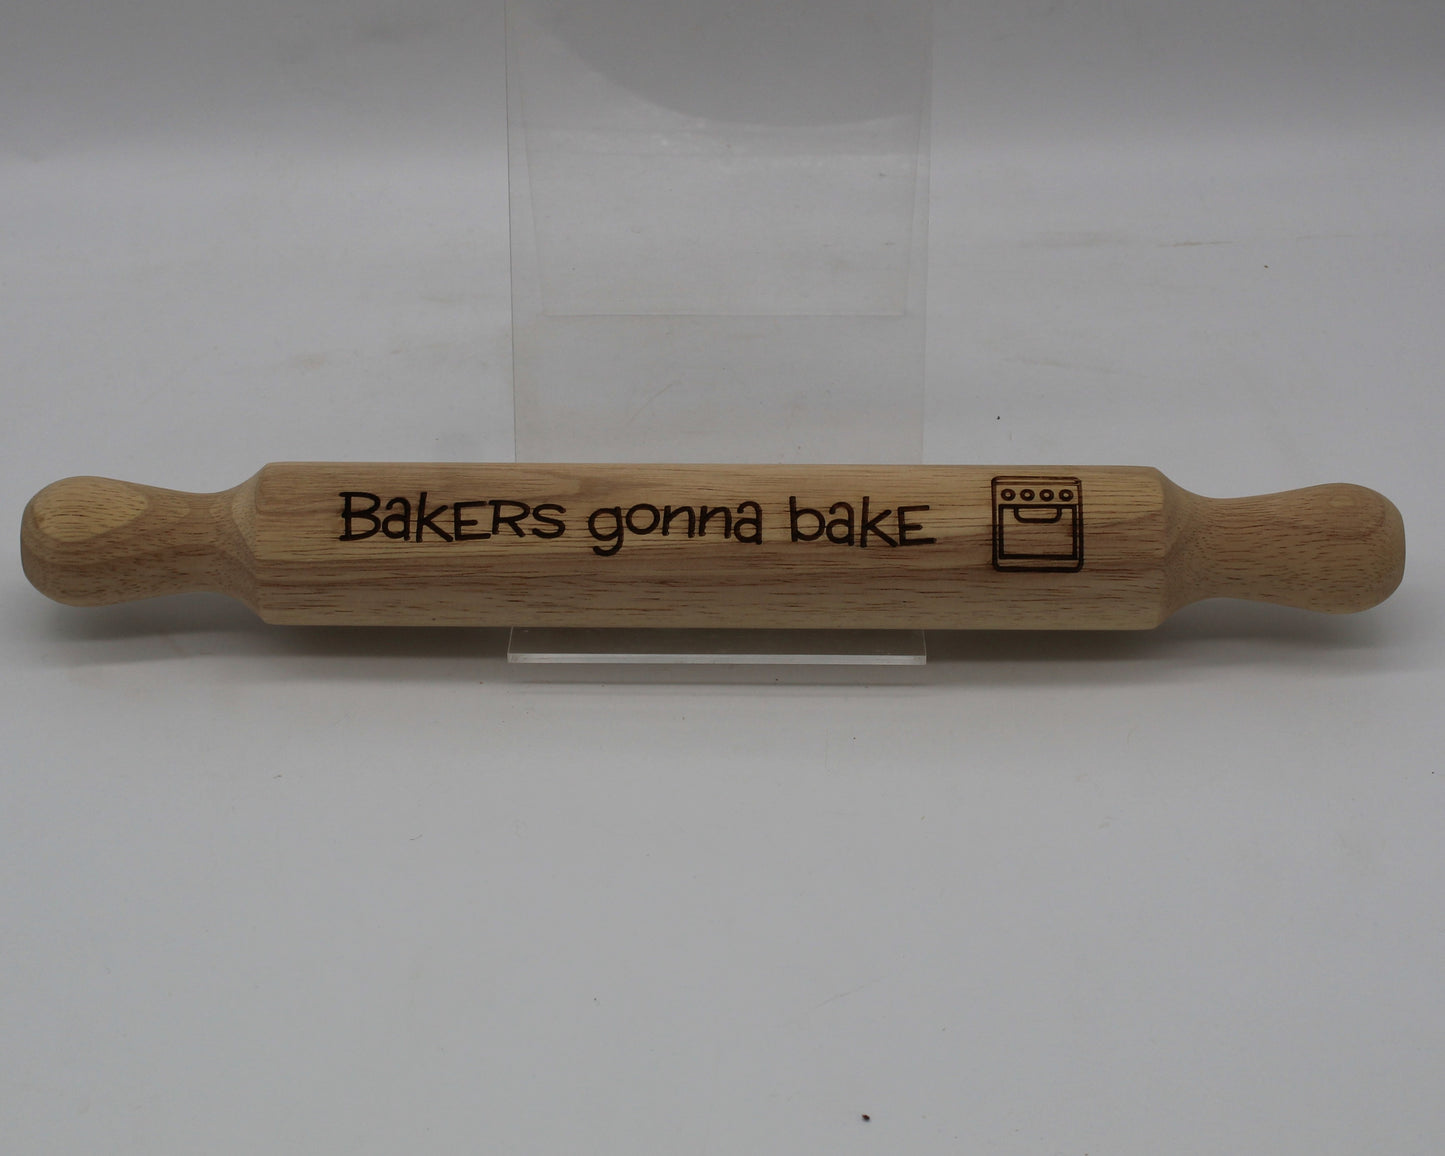 Engraved Wooden Rolling Pins - Haisley Design